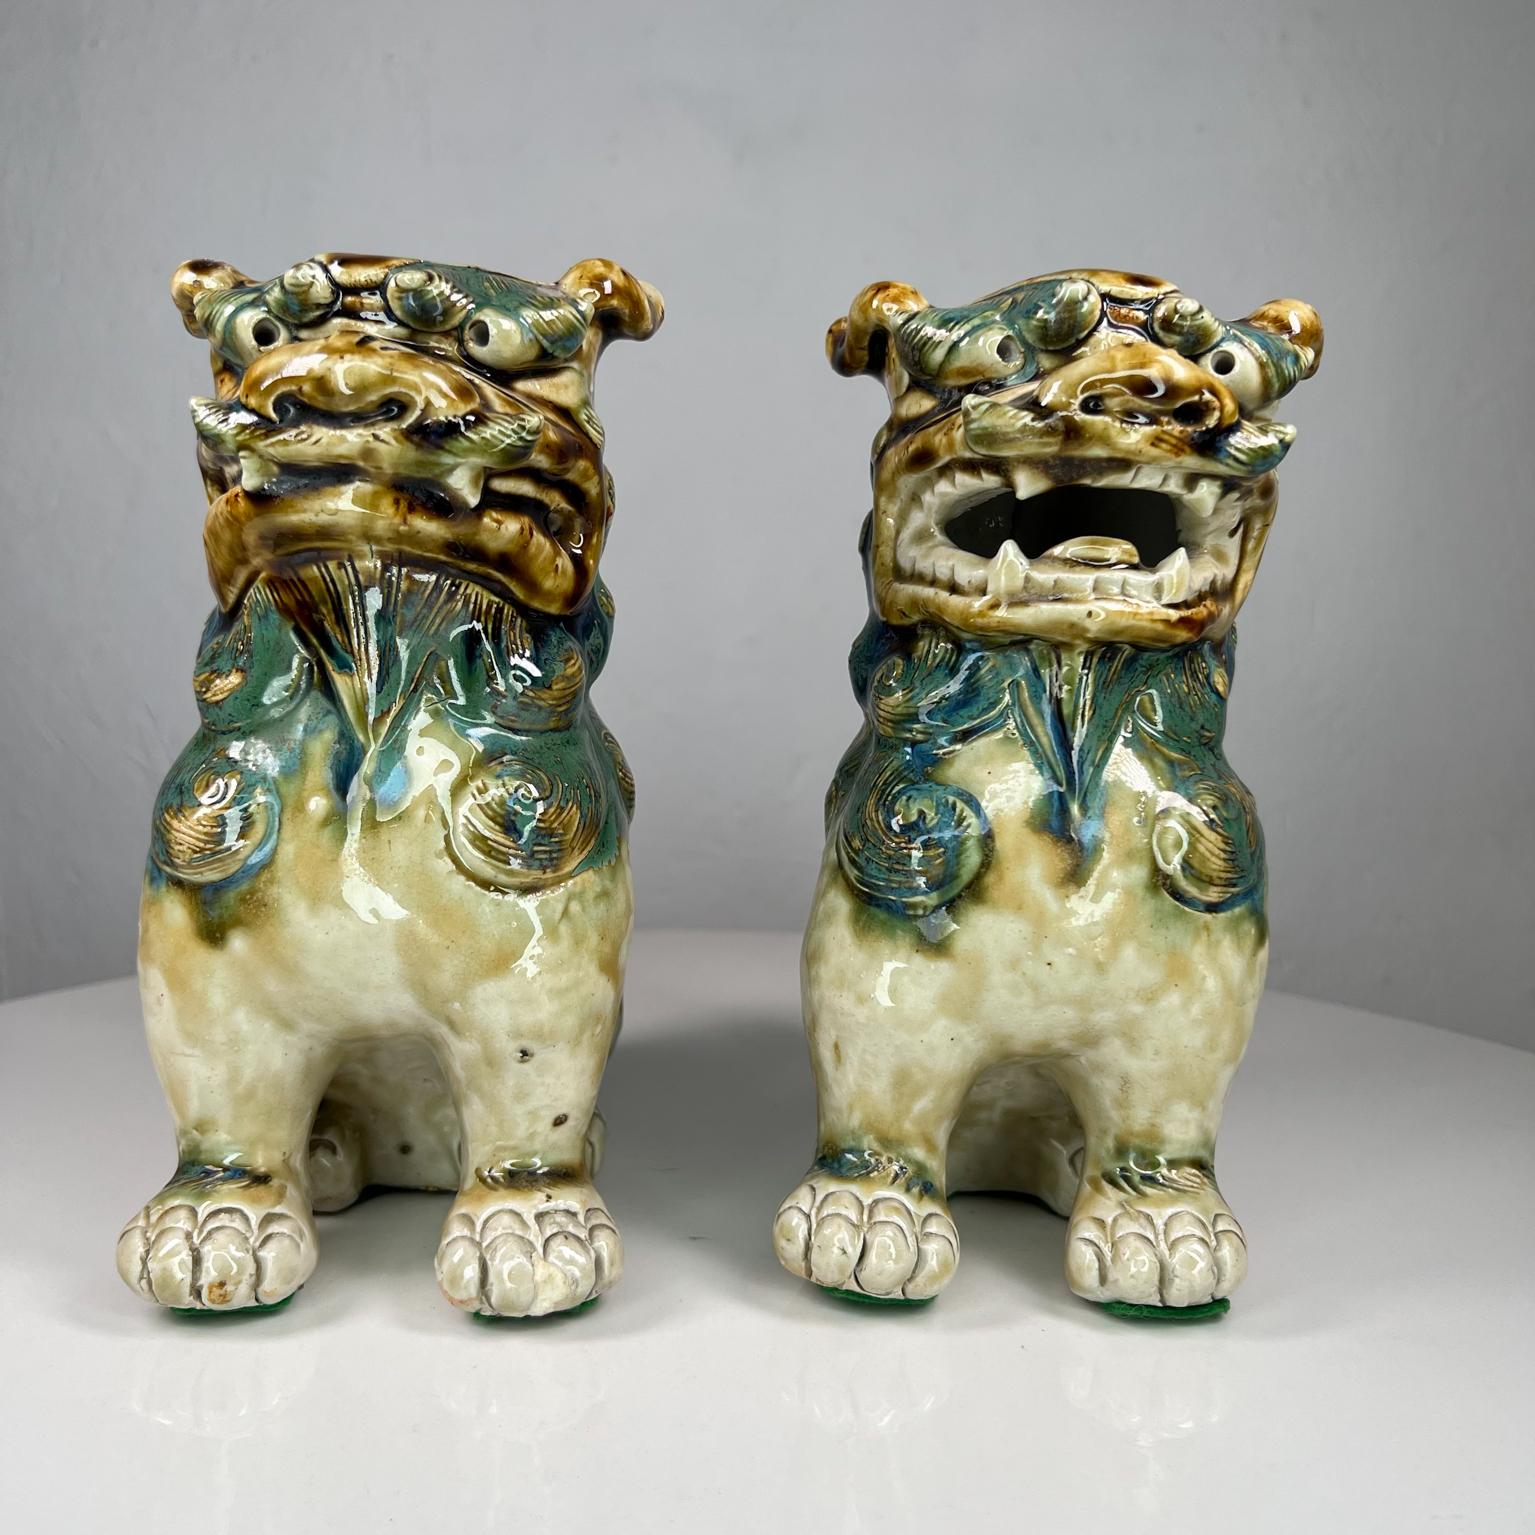 Pair of Antique Chinese figurines foo dog sculpture green glaze ceramic.
8 tall x 3.75 wide x 6.5 deep.
Preowned original vintage unrestored condition.
Refer to images please.